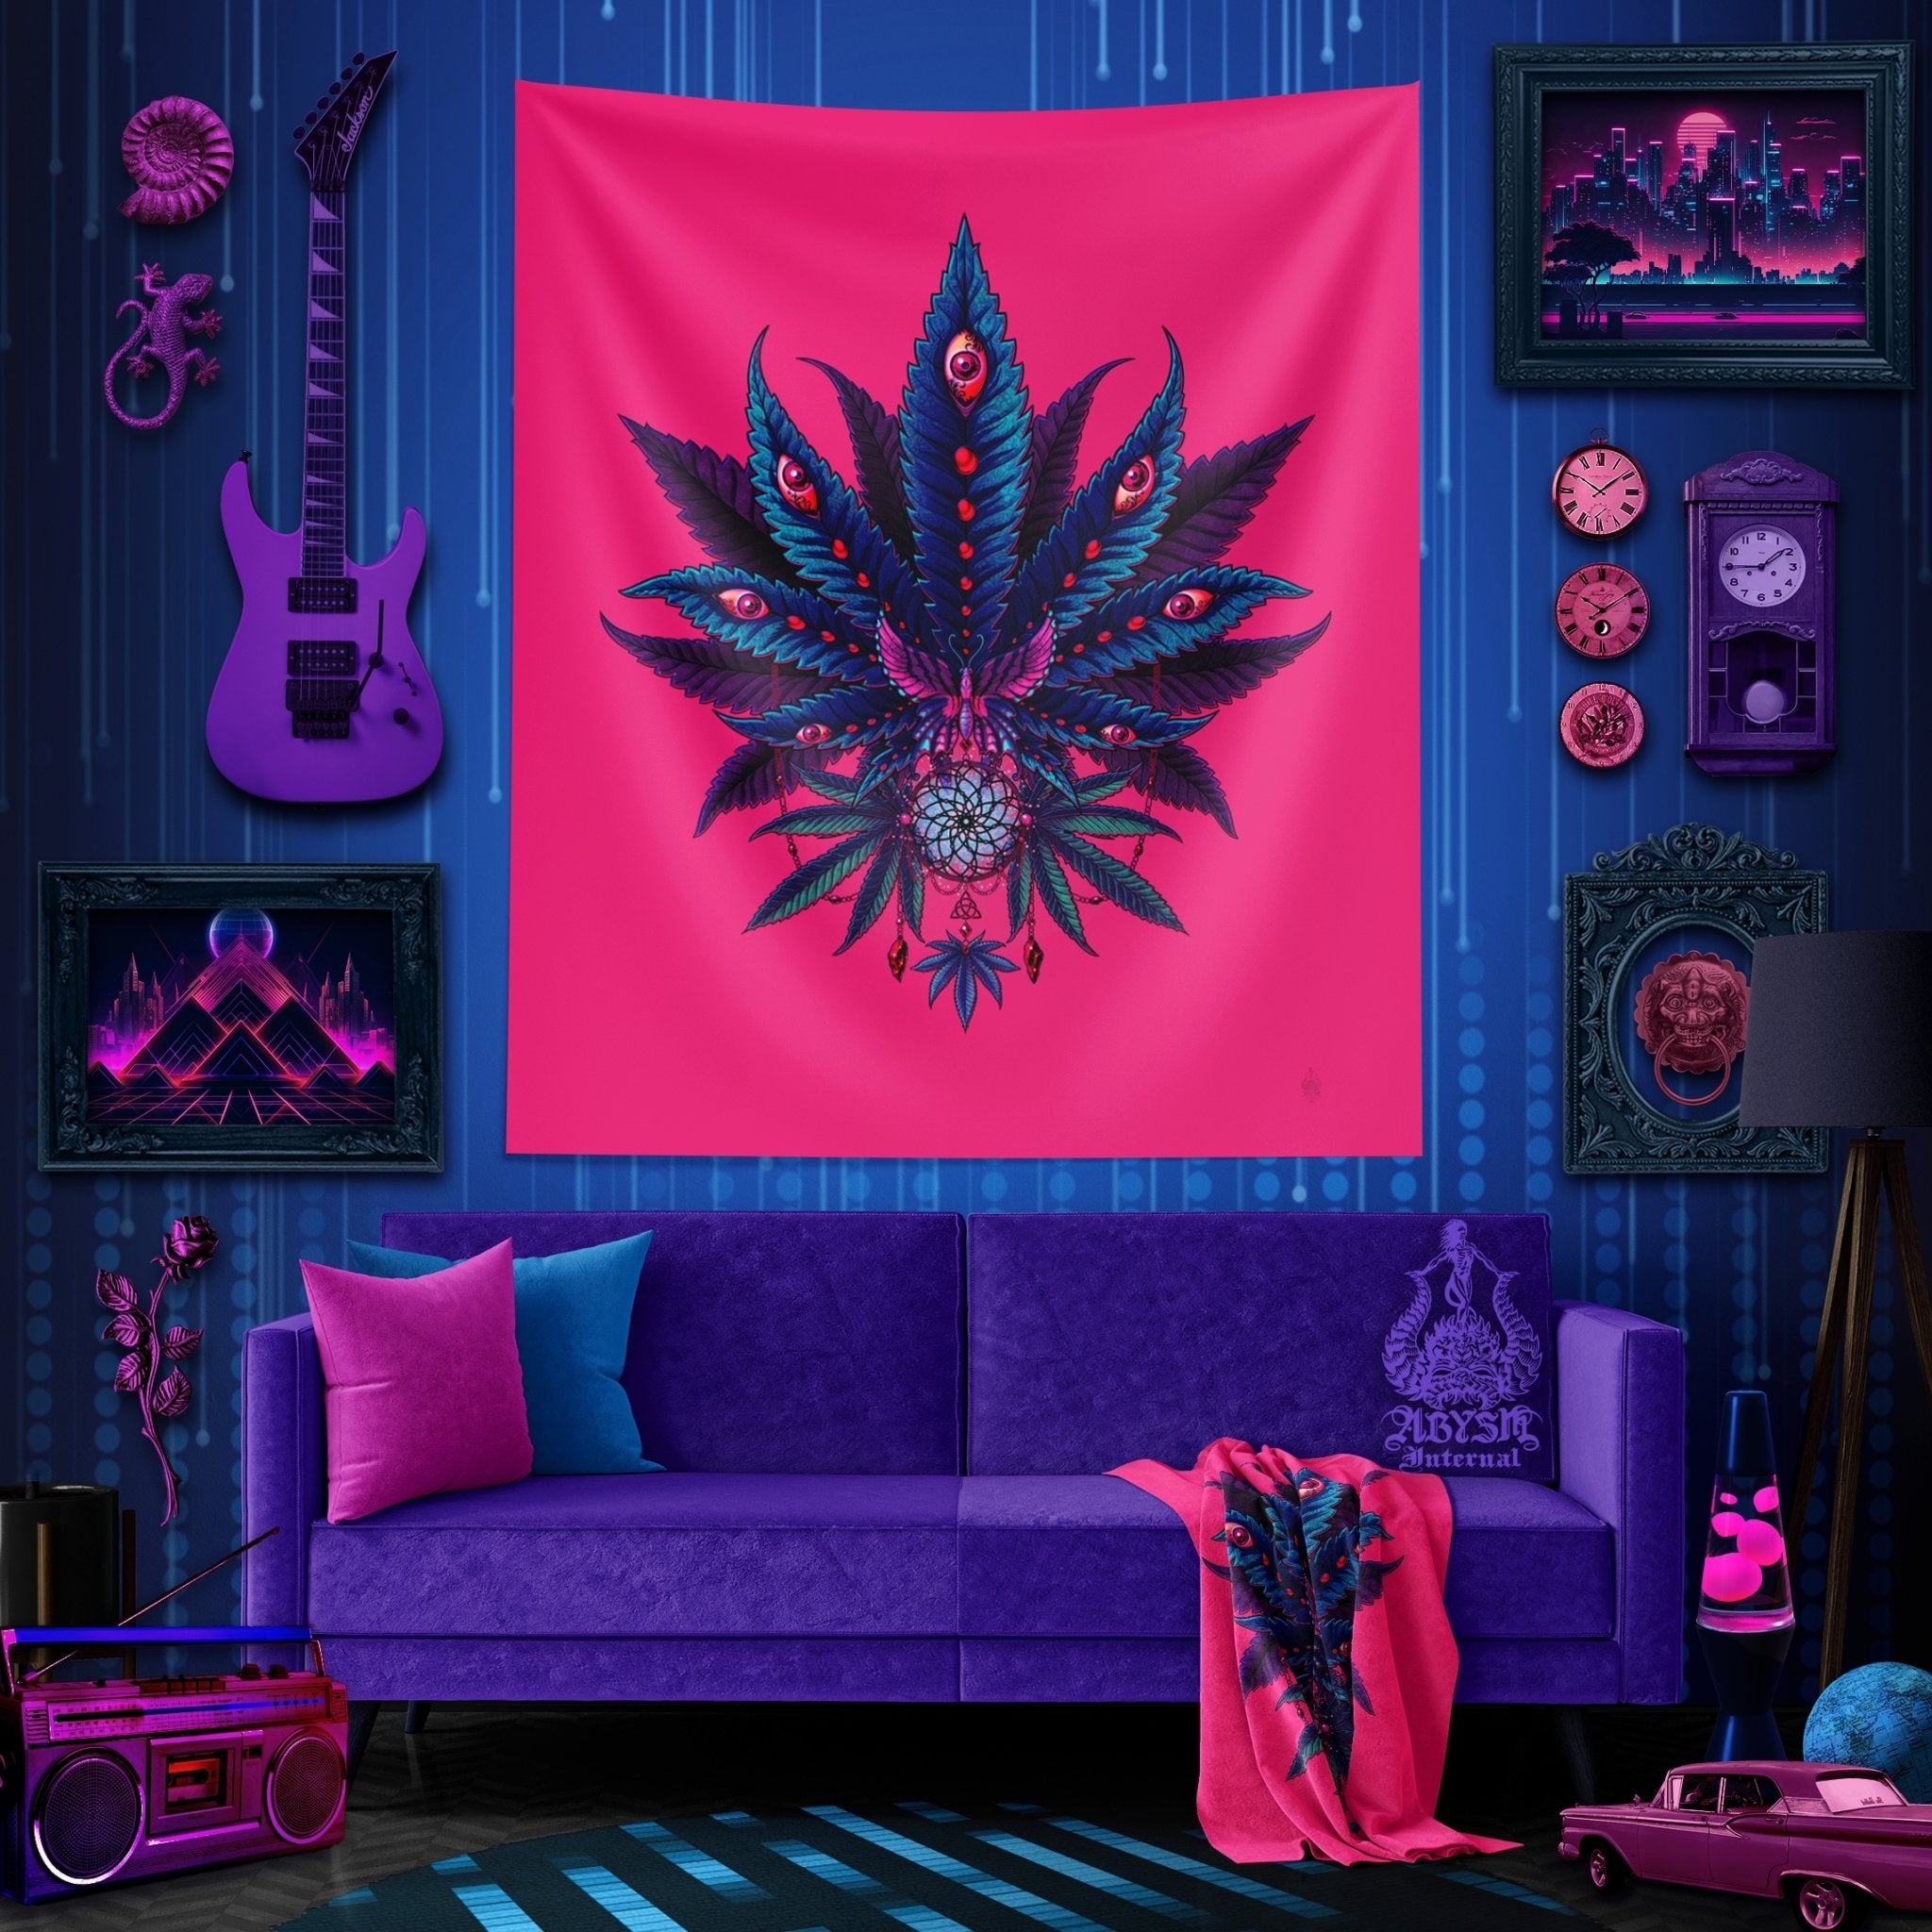 Weed Tapestry, Synthwave Cannabis Shop Decor, Marijuana Wall Hanging, Retrowave 80s Home Decor, Vaporwave Art Print, 420 Gift, Eclectic and Funky - Neon I - Abysm Internal